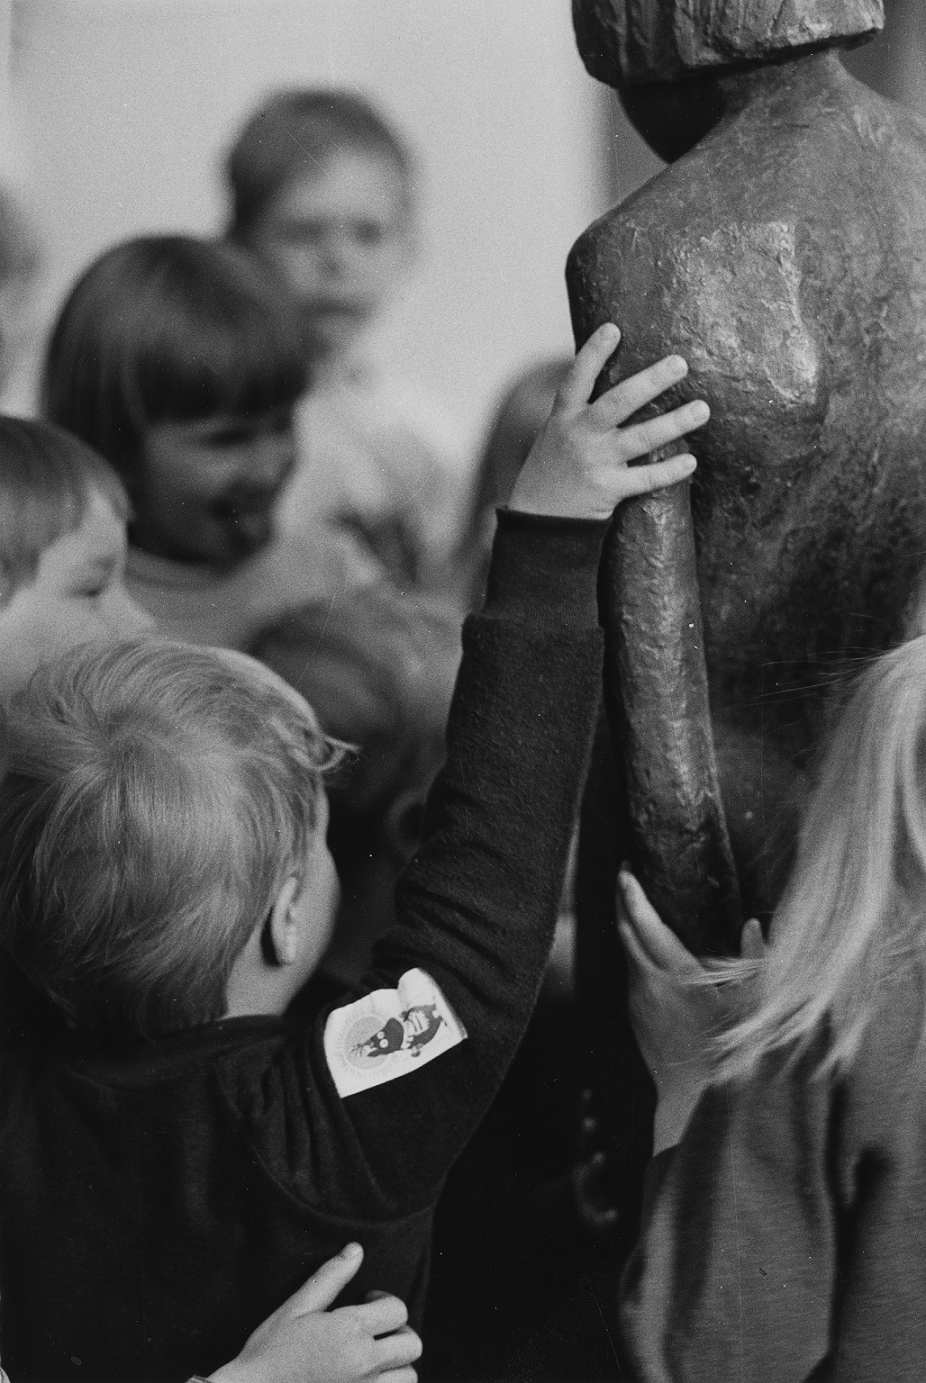 A child reaching to touch the shoulder of a sculpture representing a person.